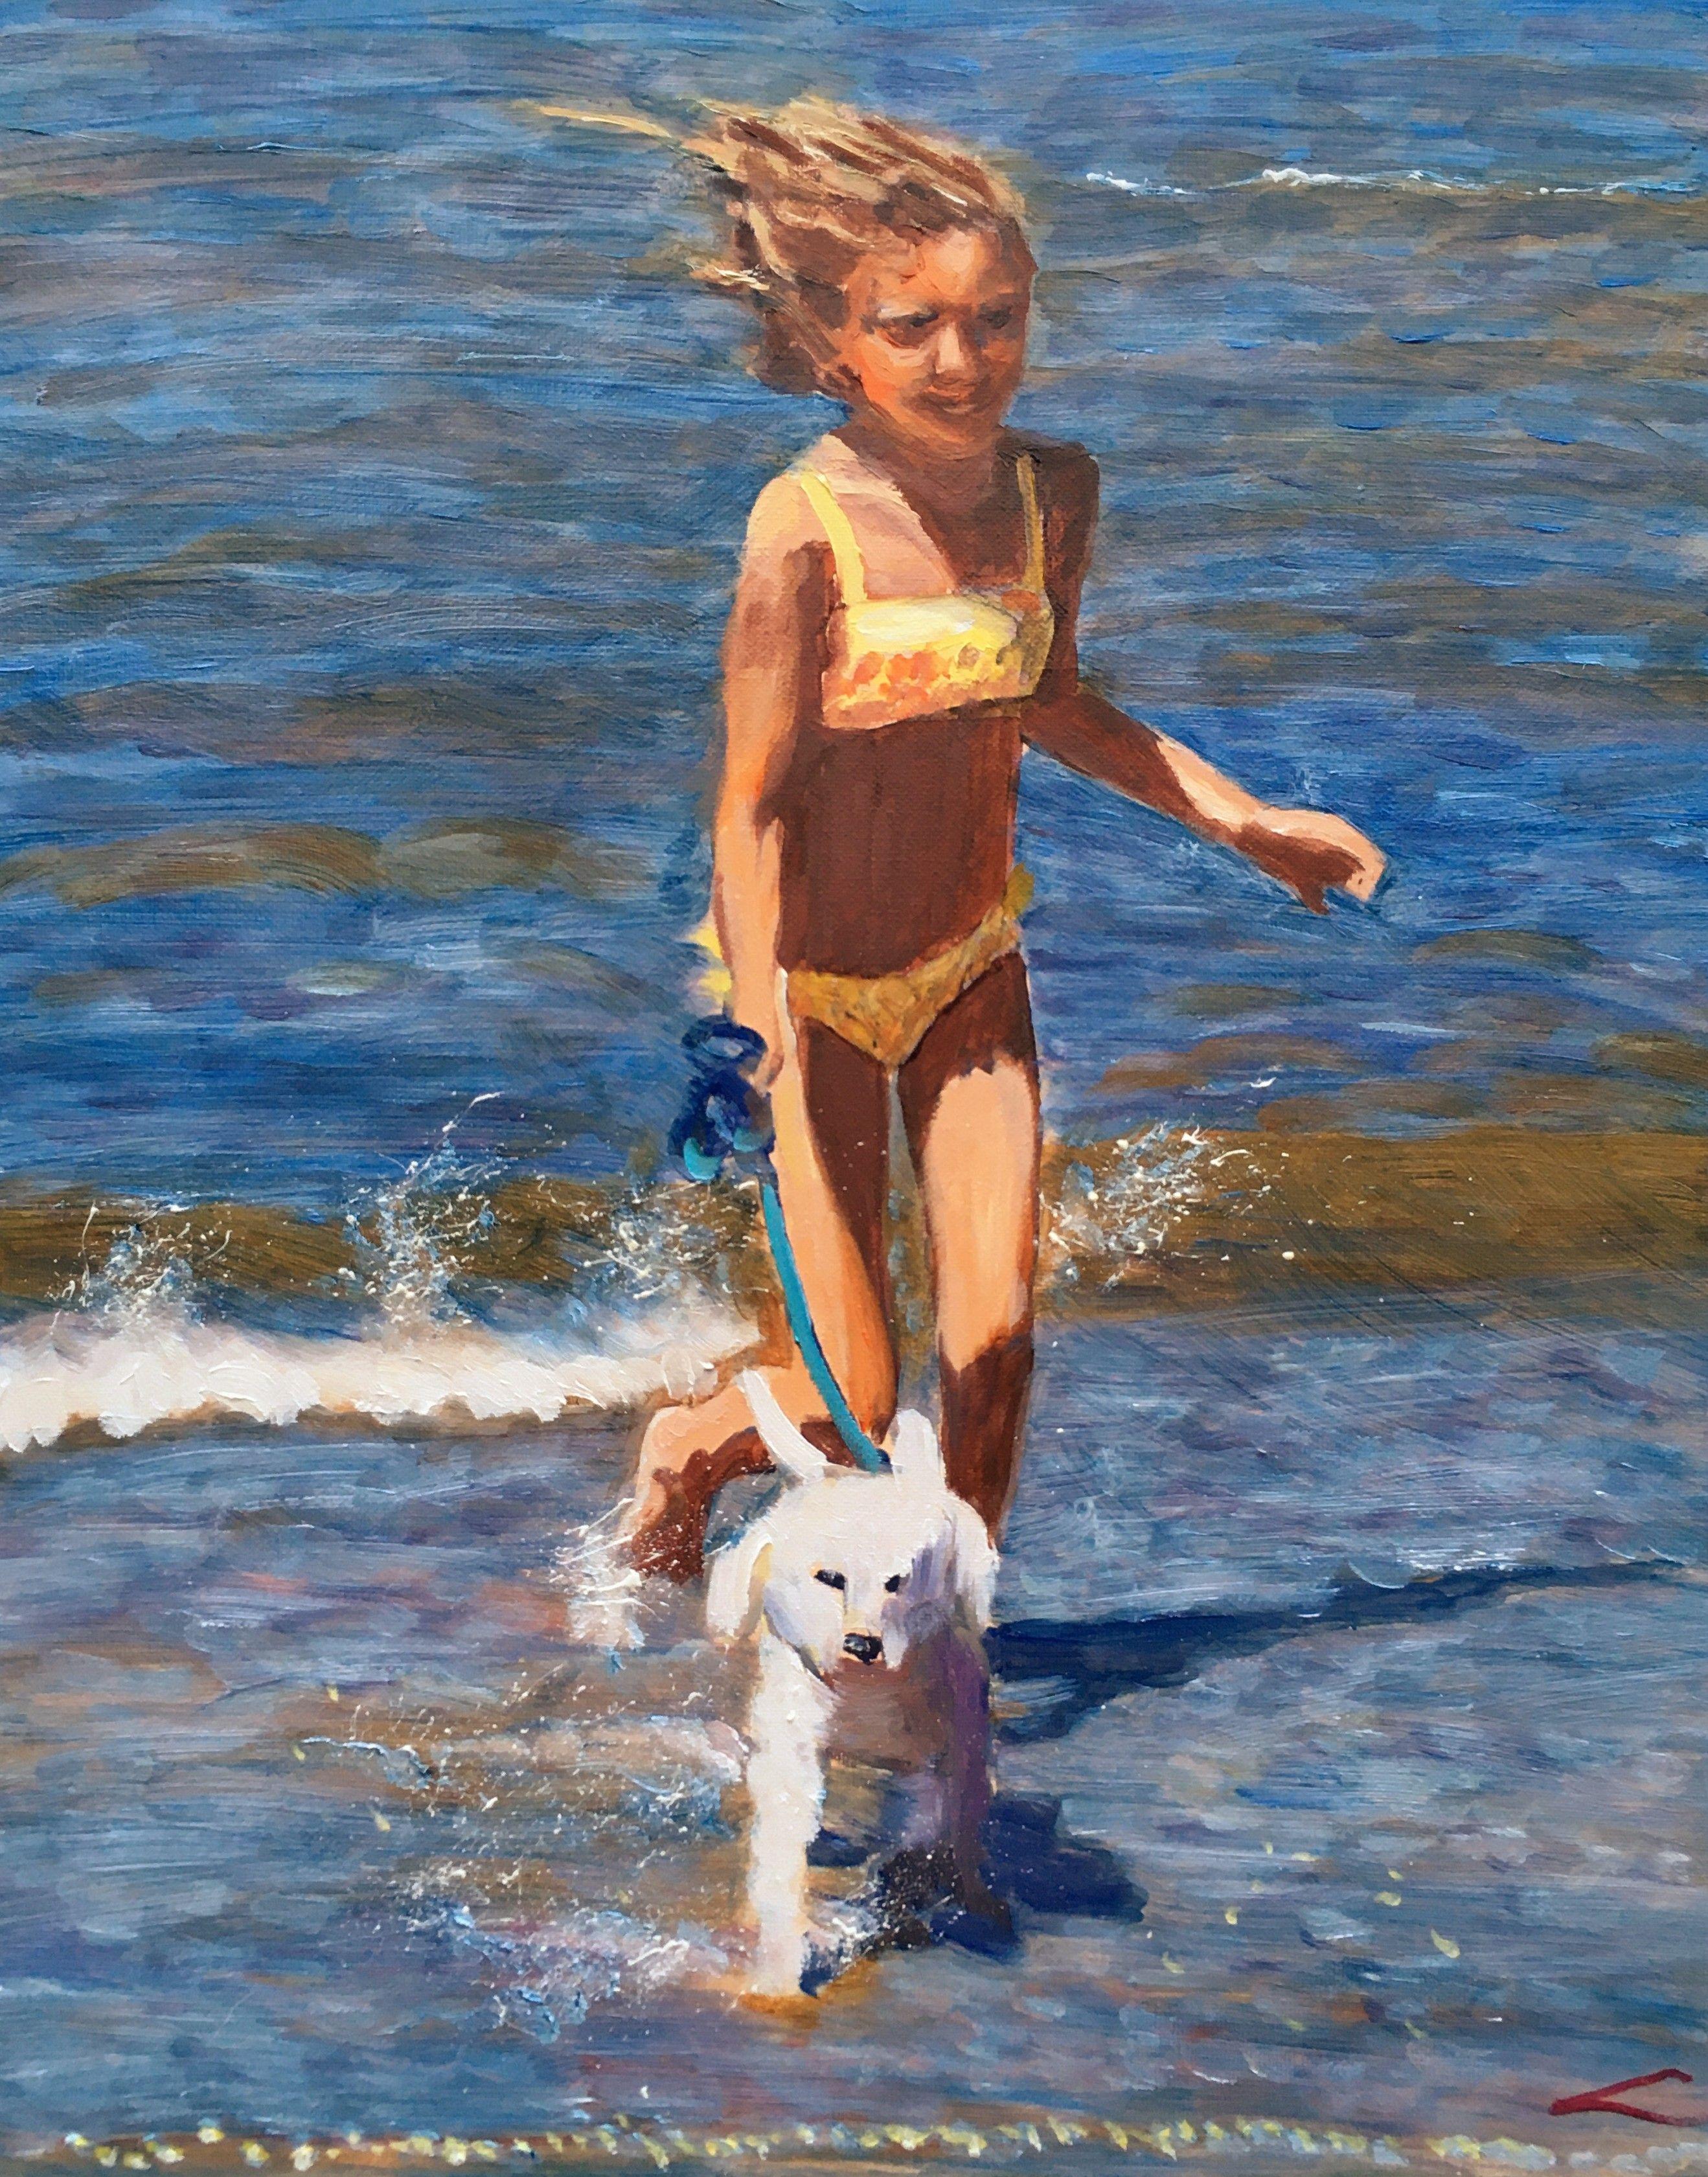 Girl with a doggy at the sea. Alla prima oil painting with few final tuches when dry. Beach Paintings always inspire thoughts of holidays, long walks, warm breezes and relaxation. beach and ocean themed paintings that will bring the outdoors inside